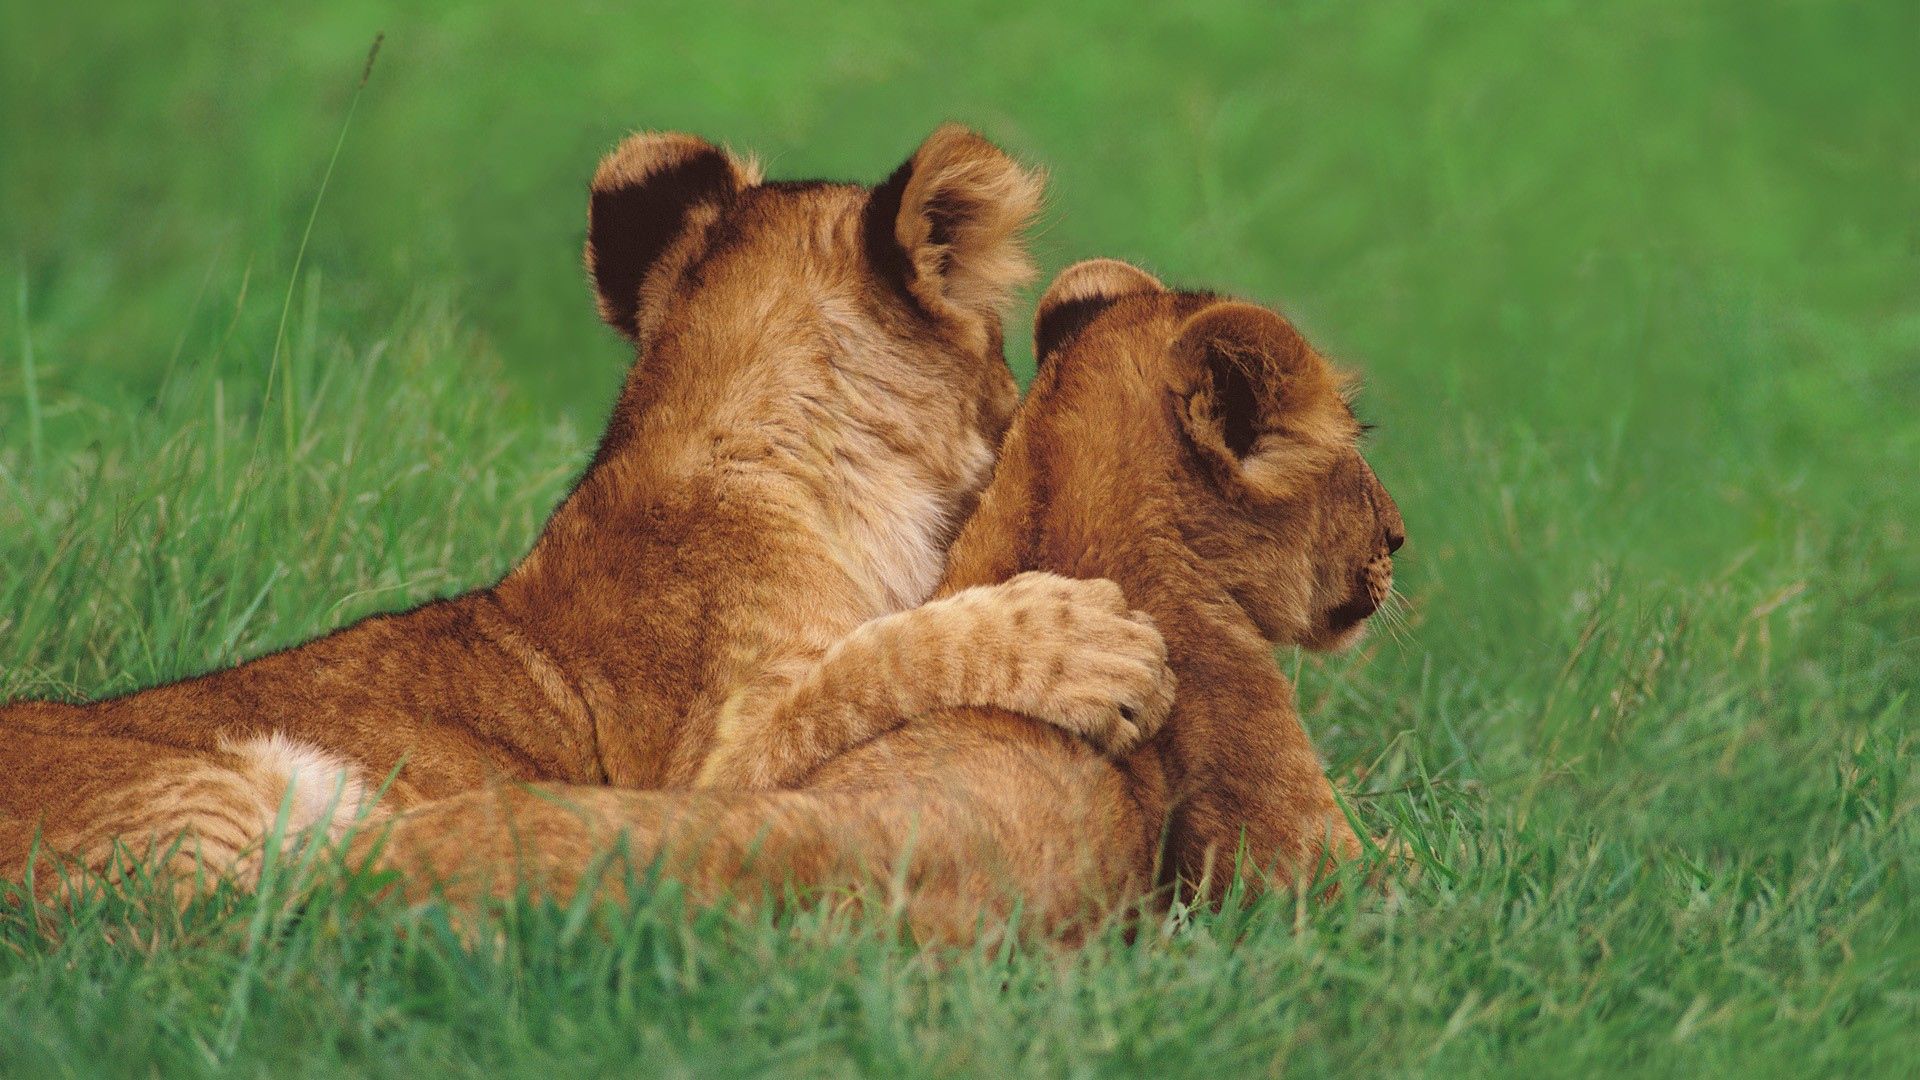 lions, young, animals, grass, couple, pair, to lie down, lie